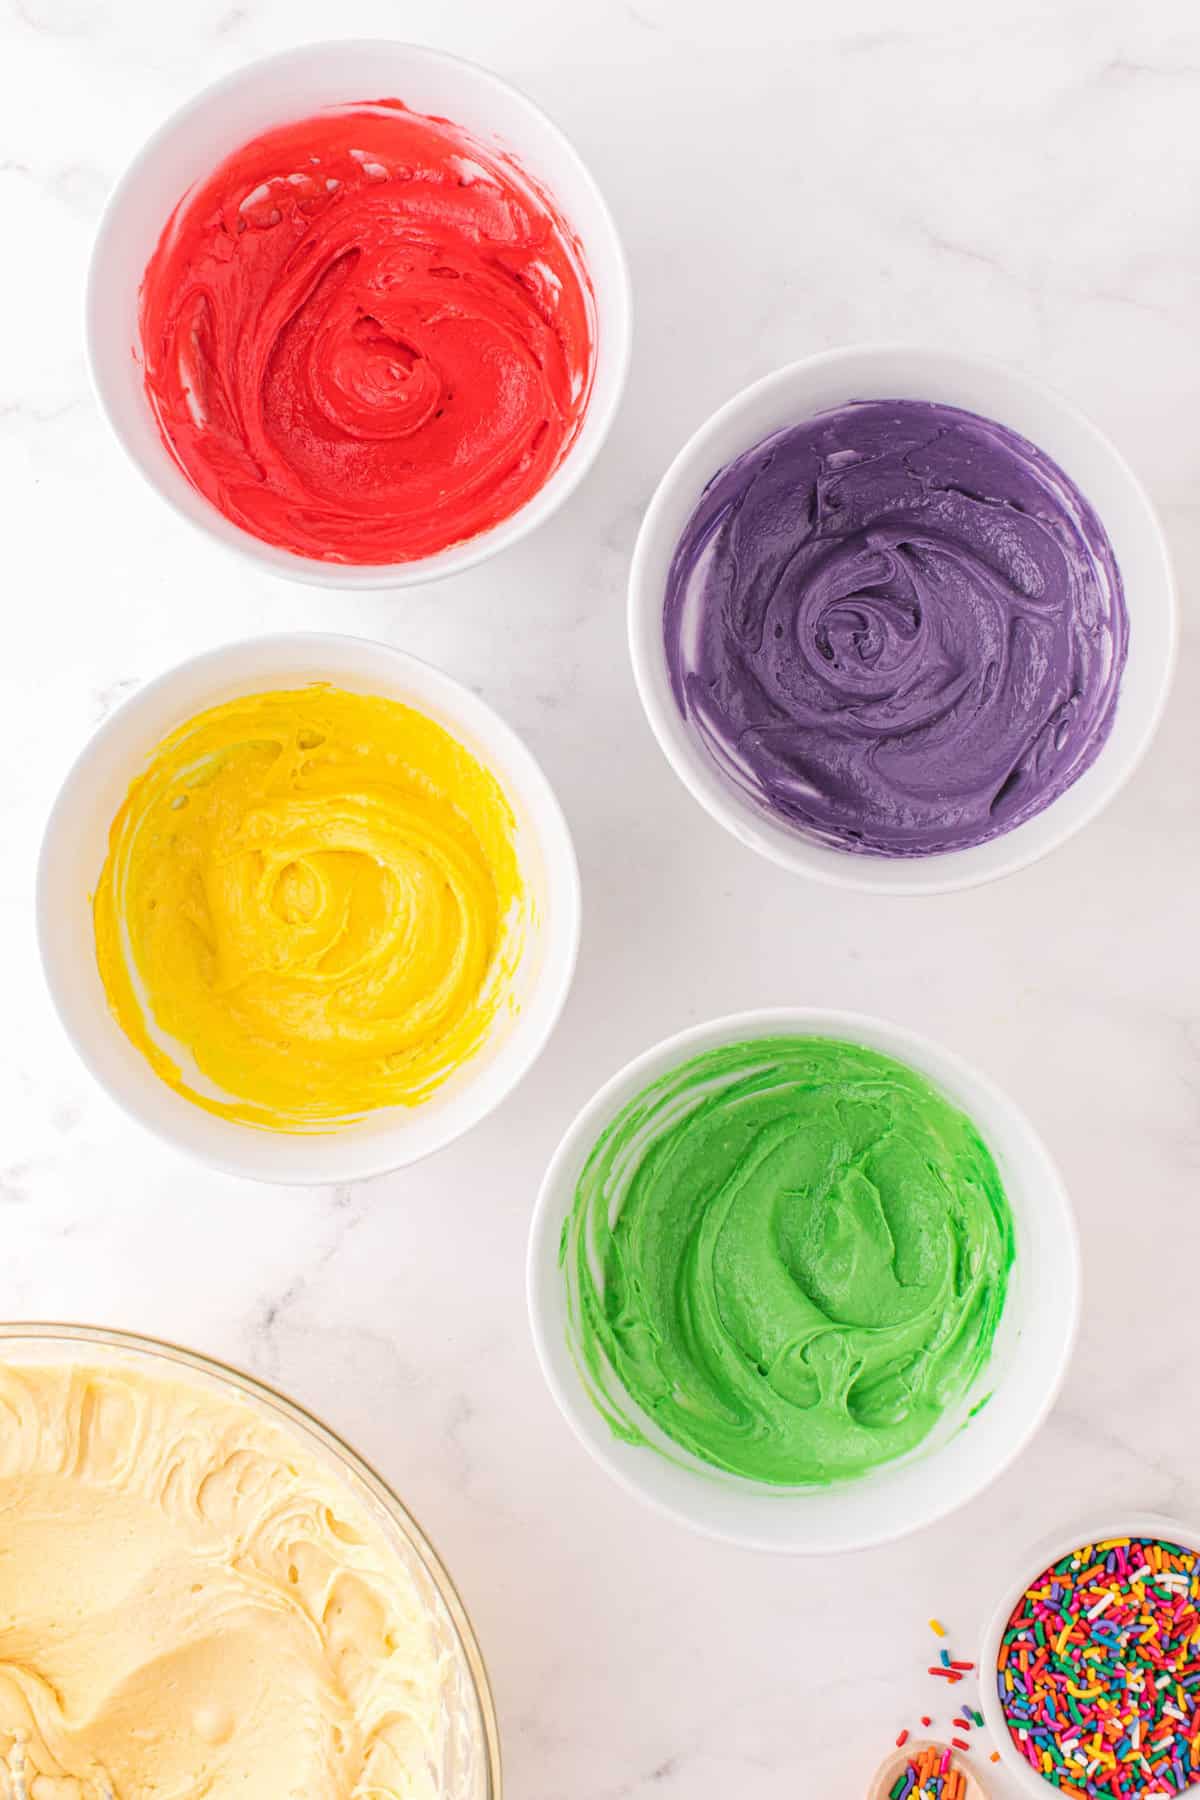 Add food coloring to the individual bowls.